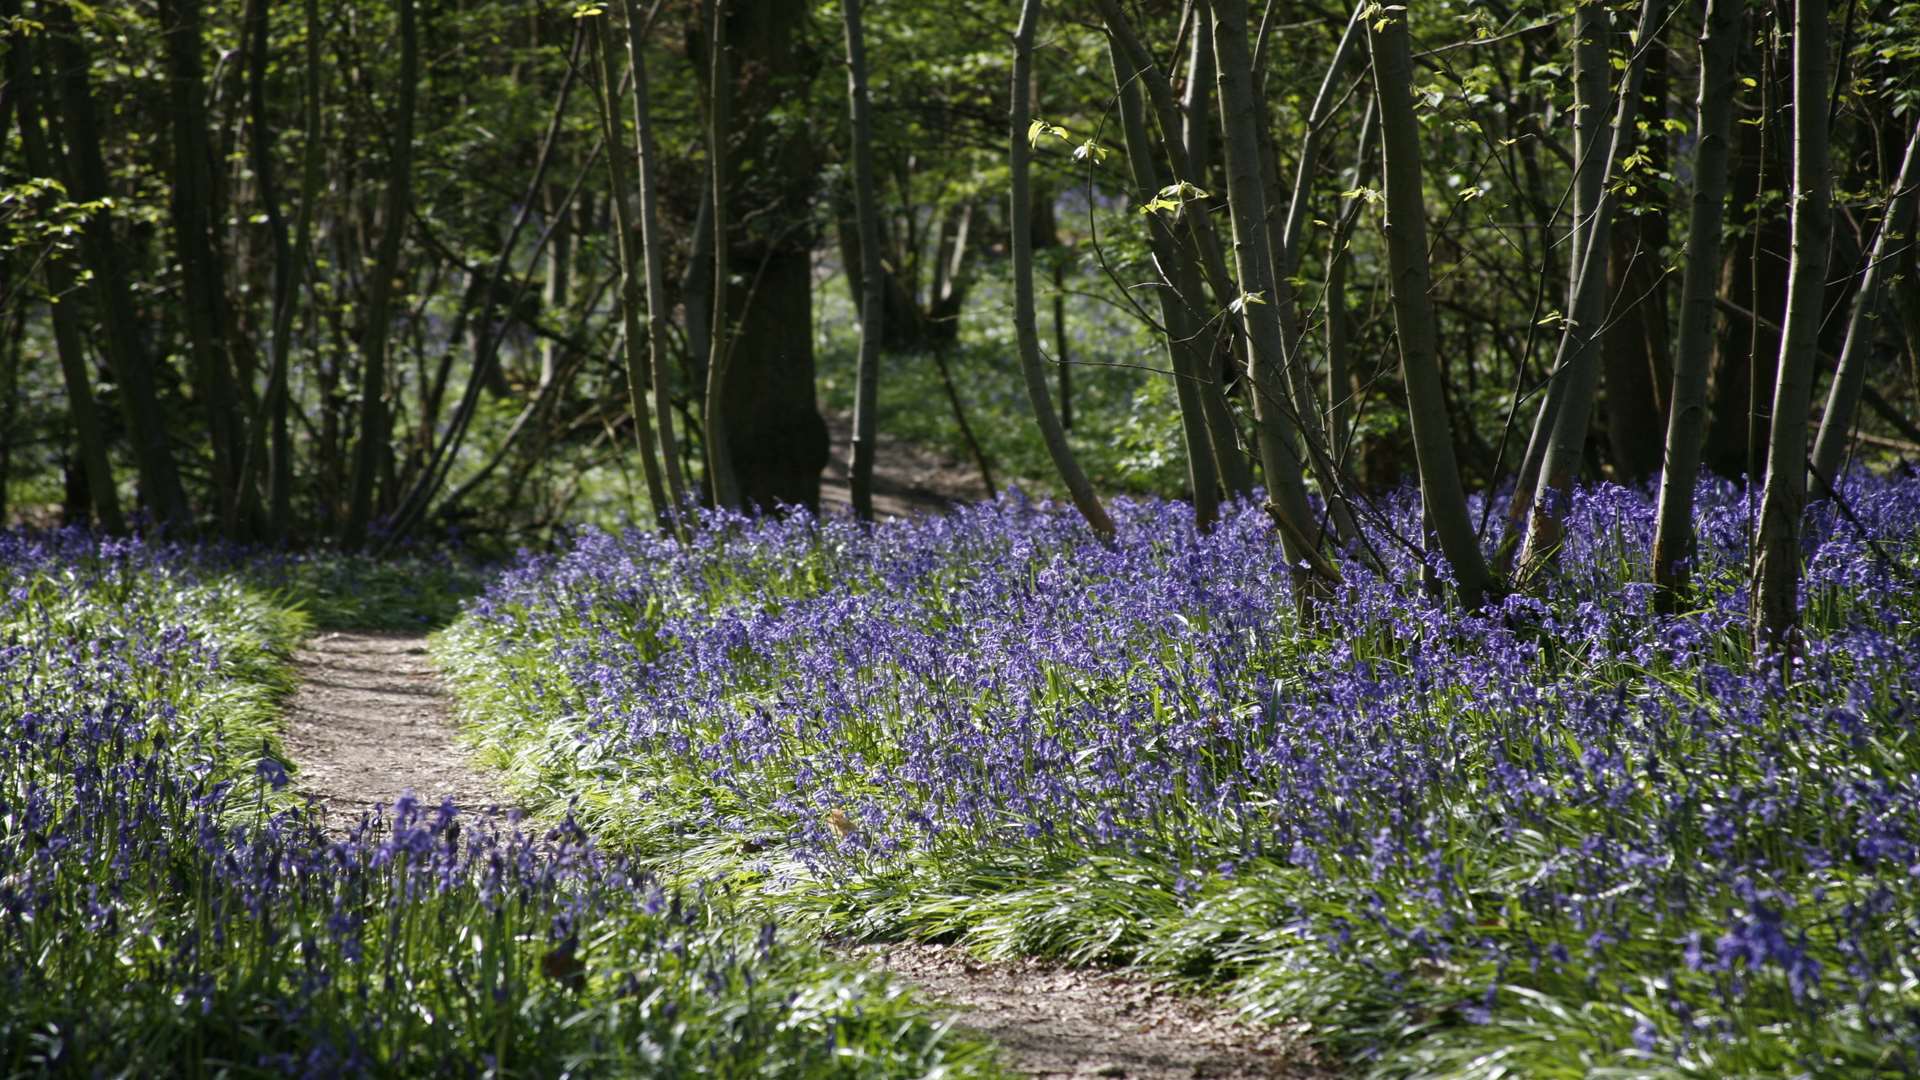 There are two types of bluebell found in the UK, native and Spanish bluebells